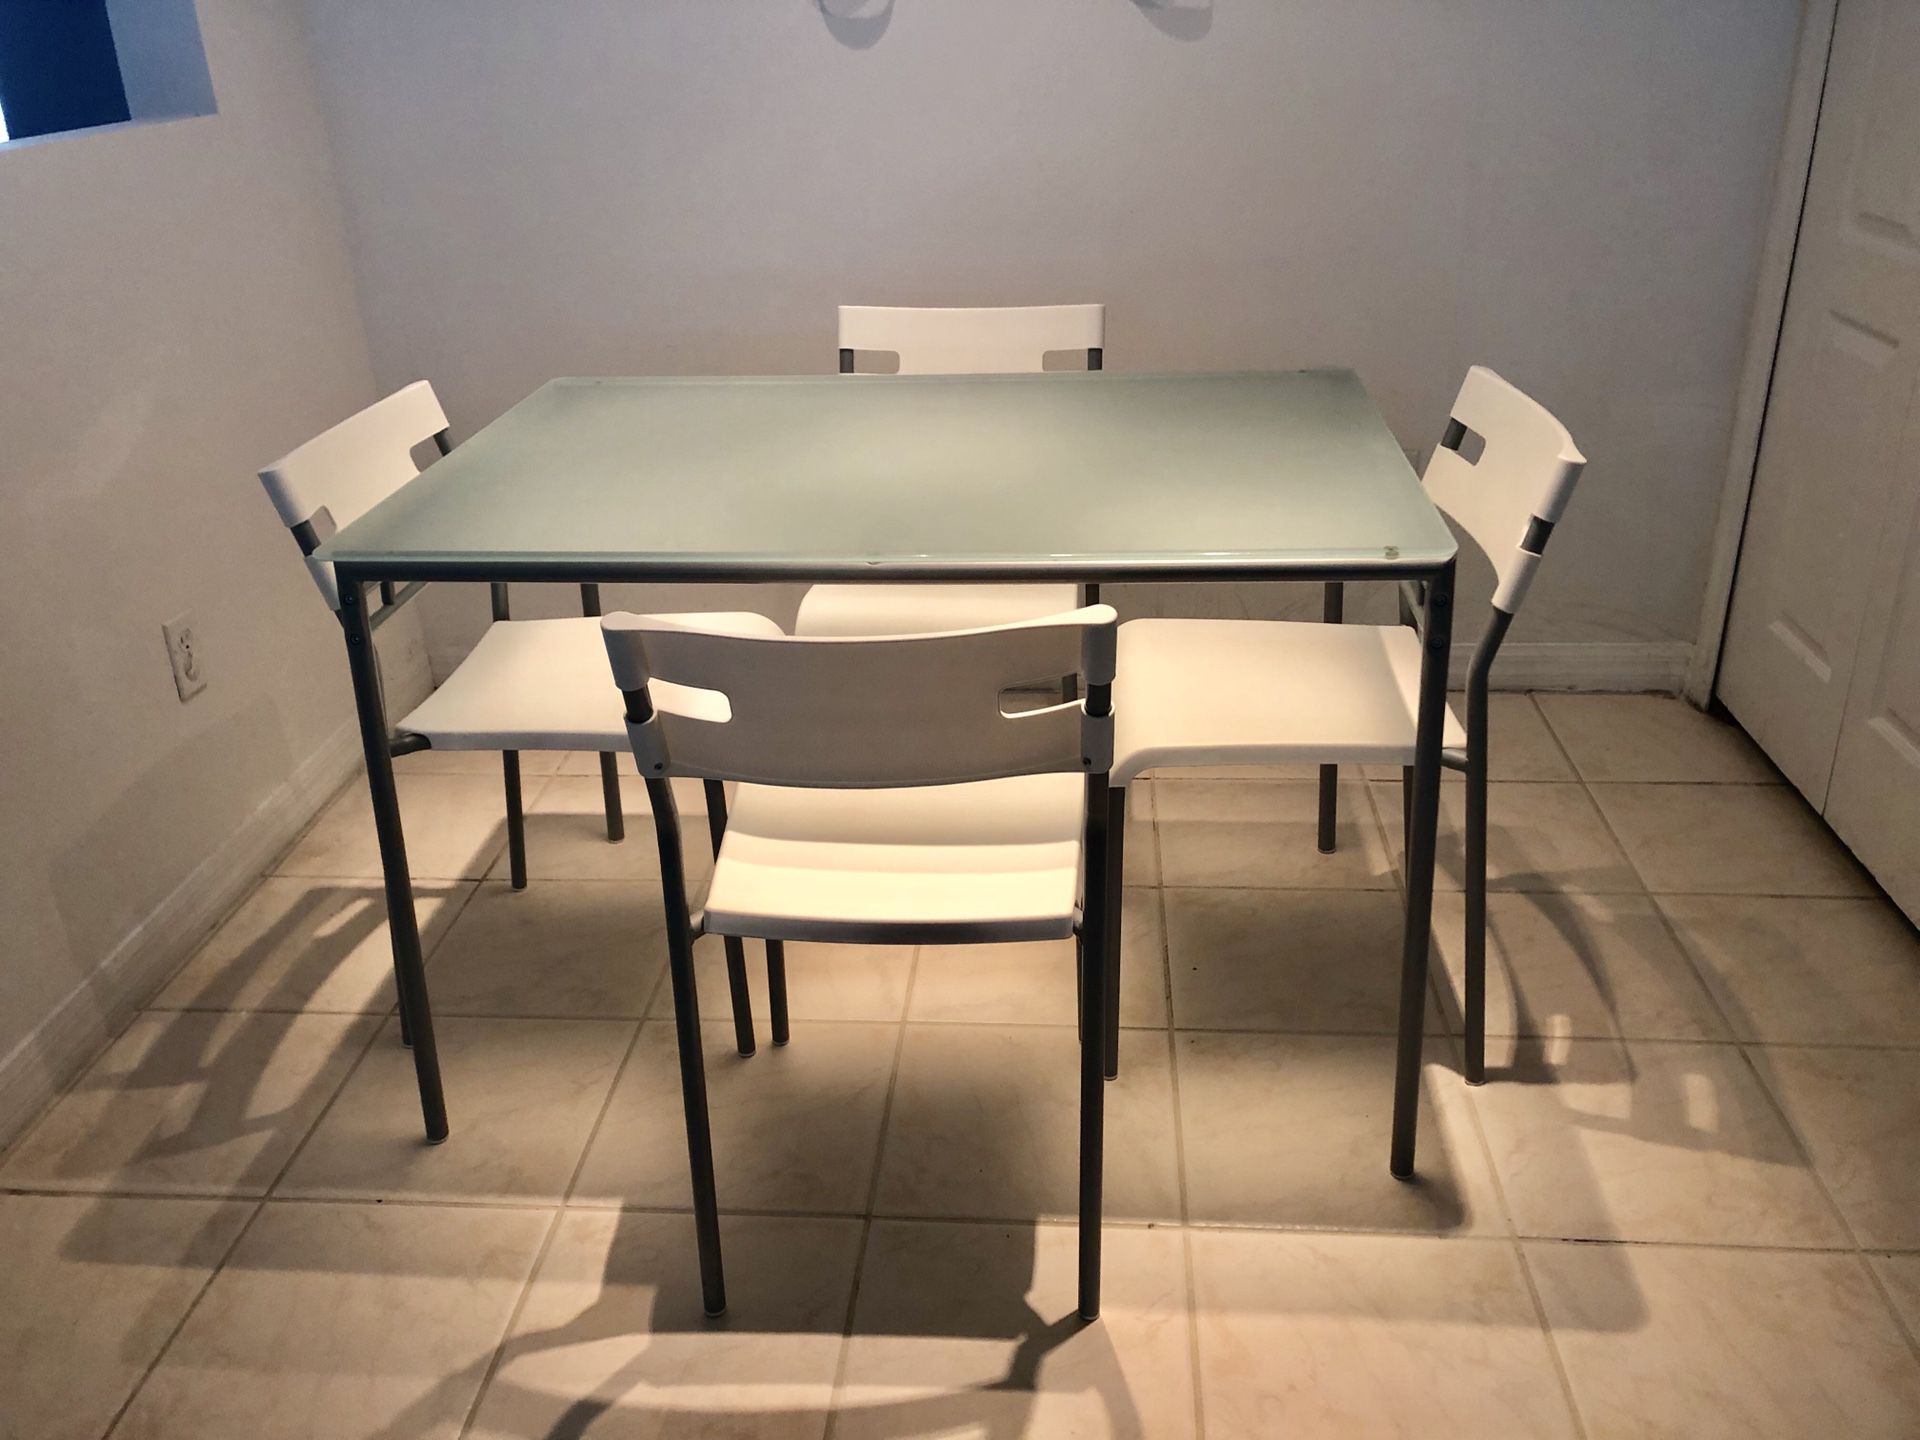 Dinette set with 4 chairs